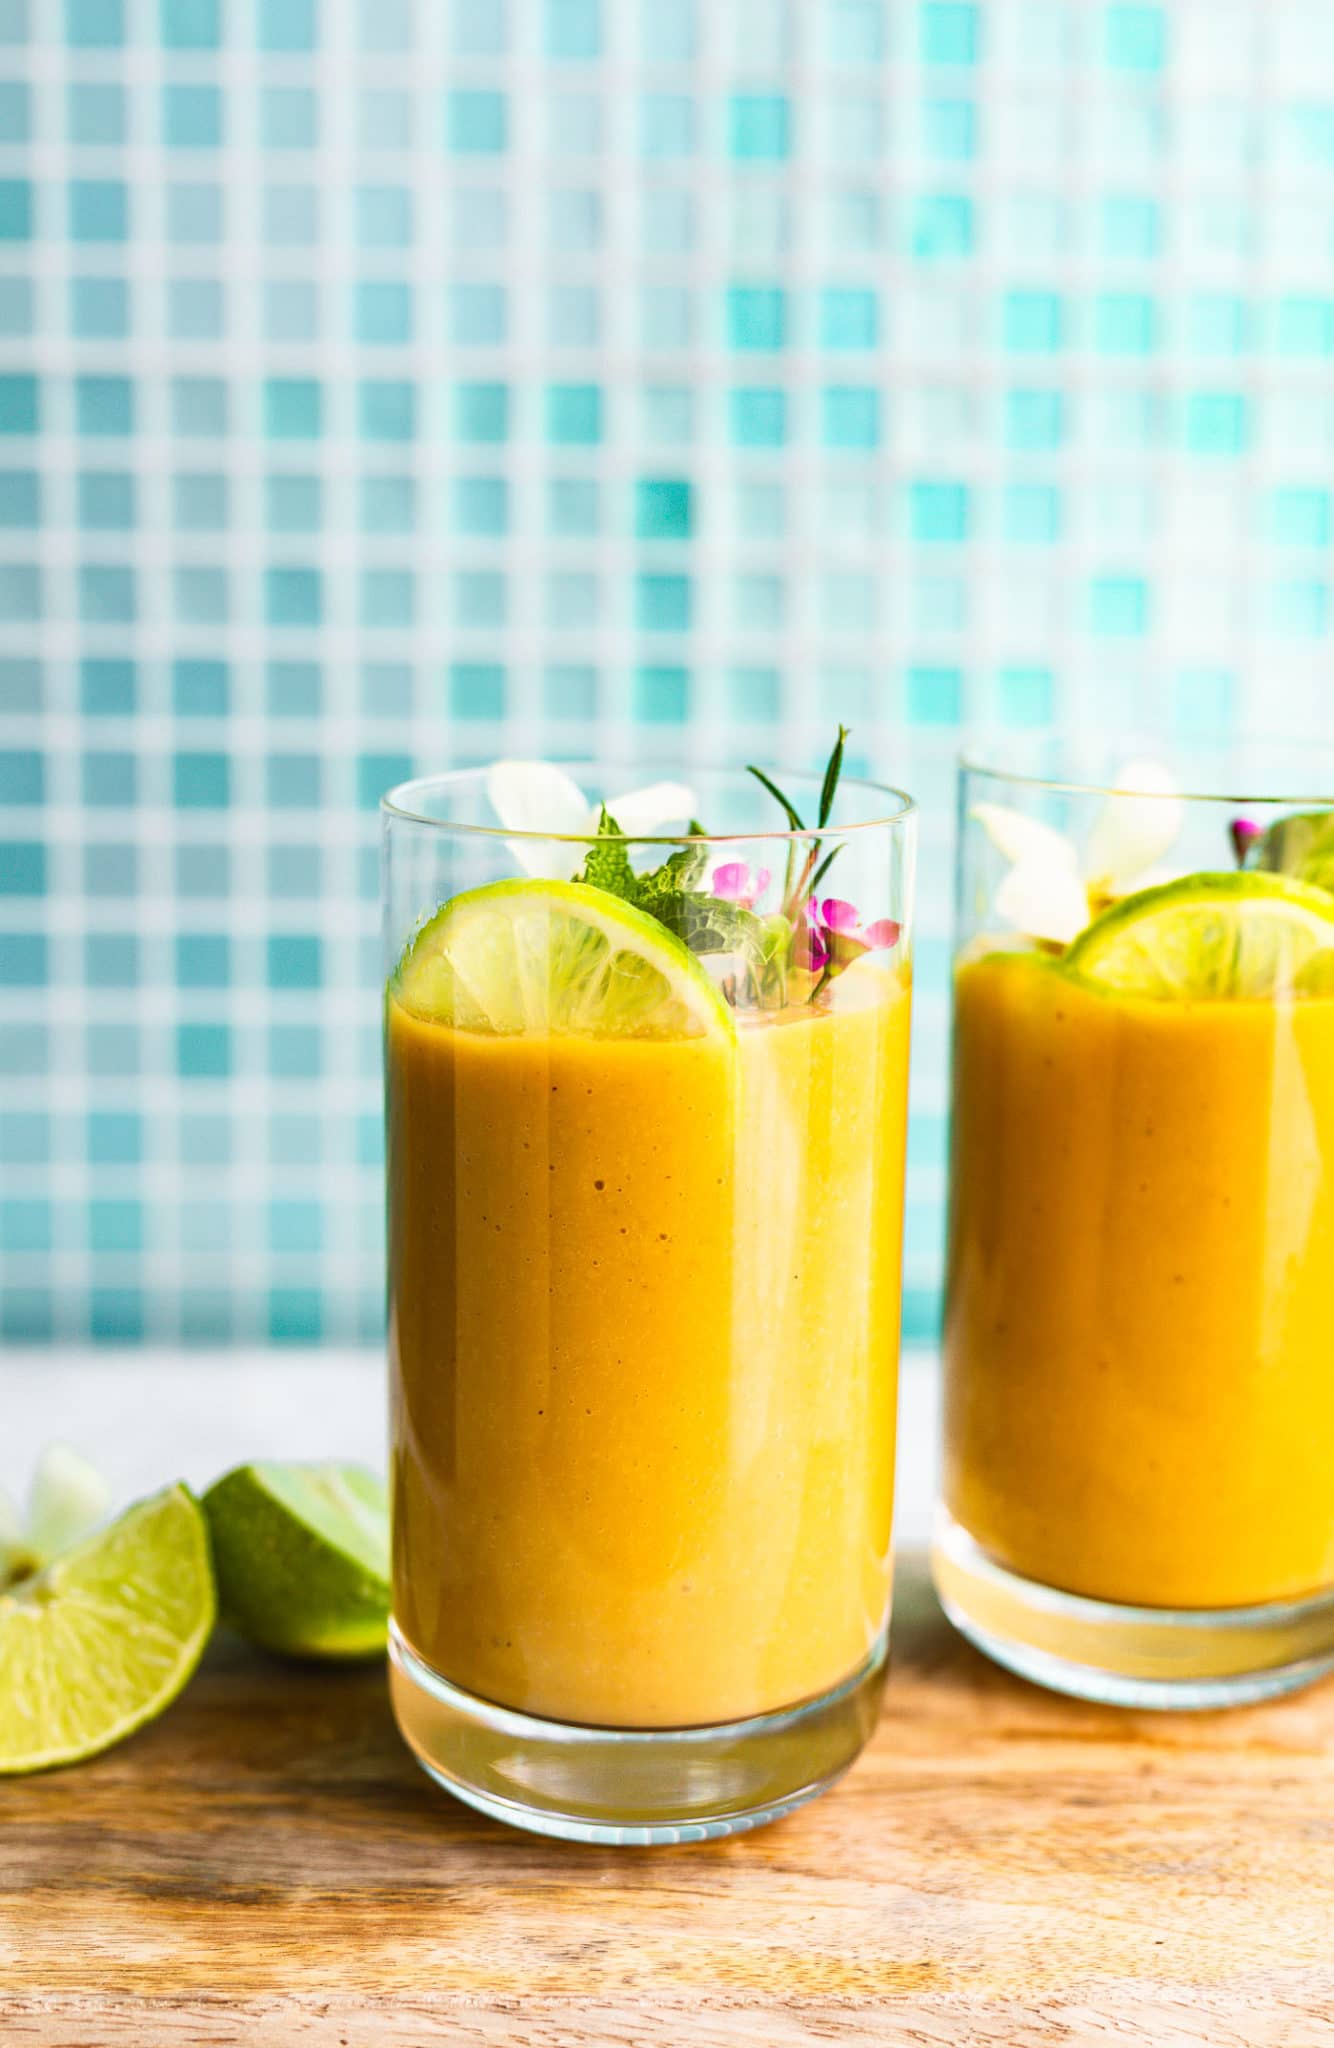 A side shot of two turmeric smoothies in glasses on a serving tray with a garnish of lime, mint, and flowers.